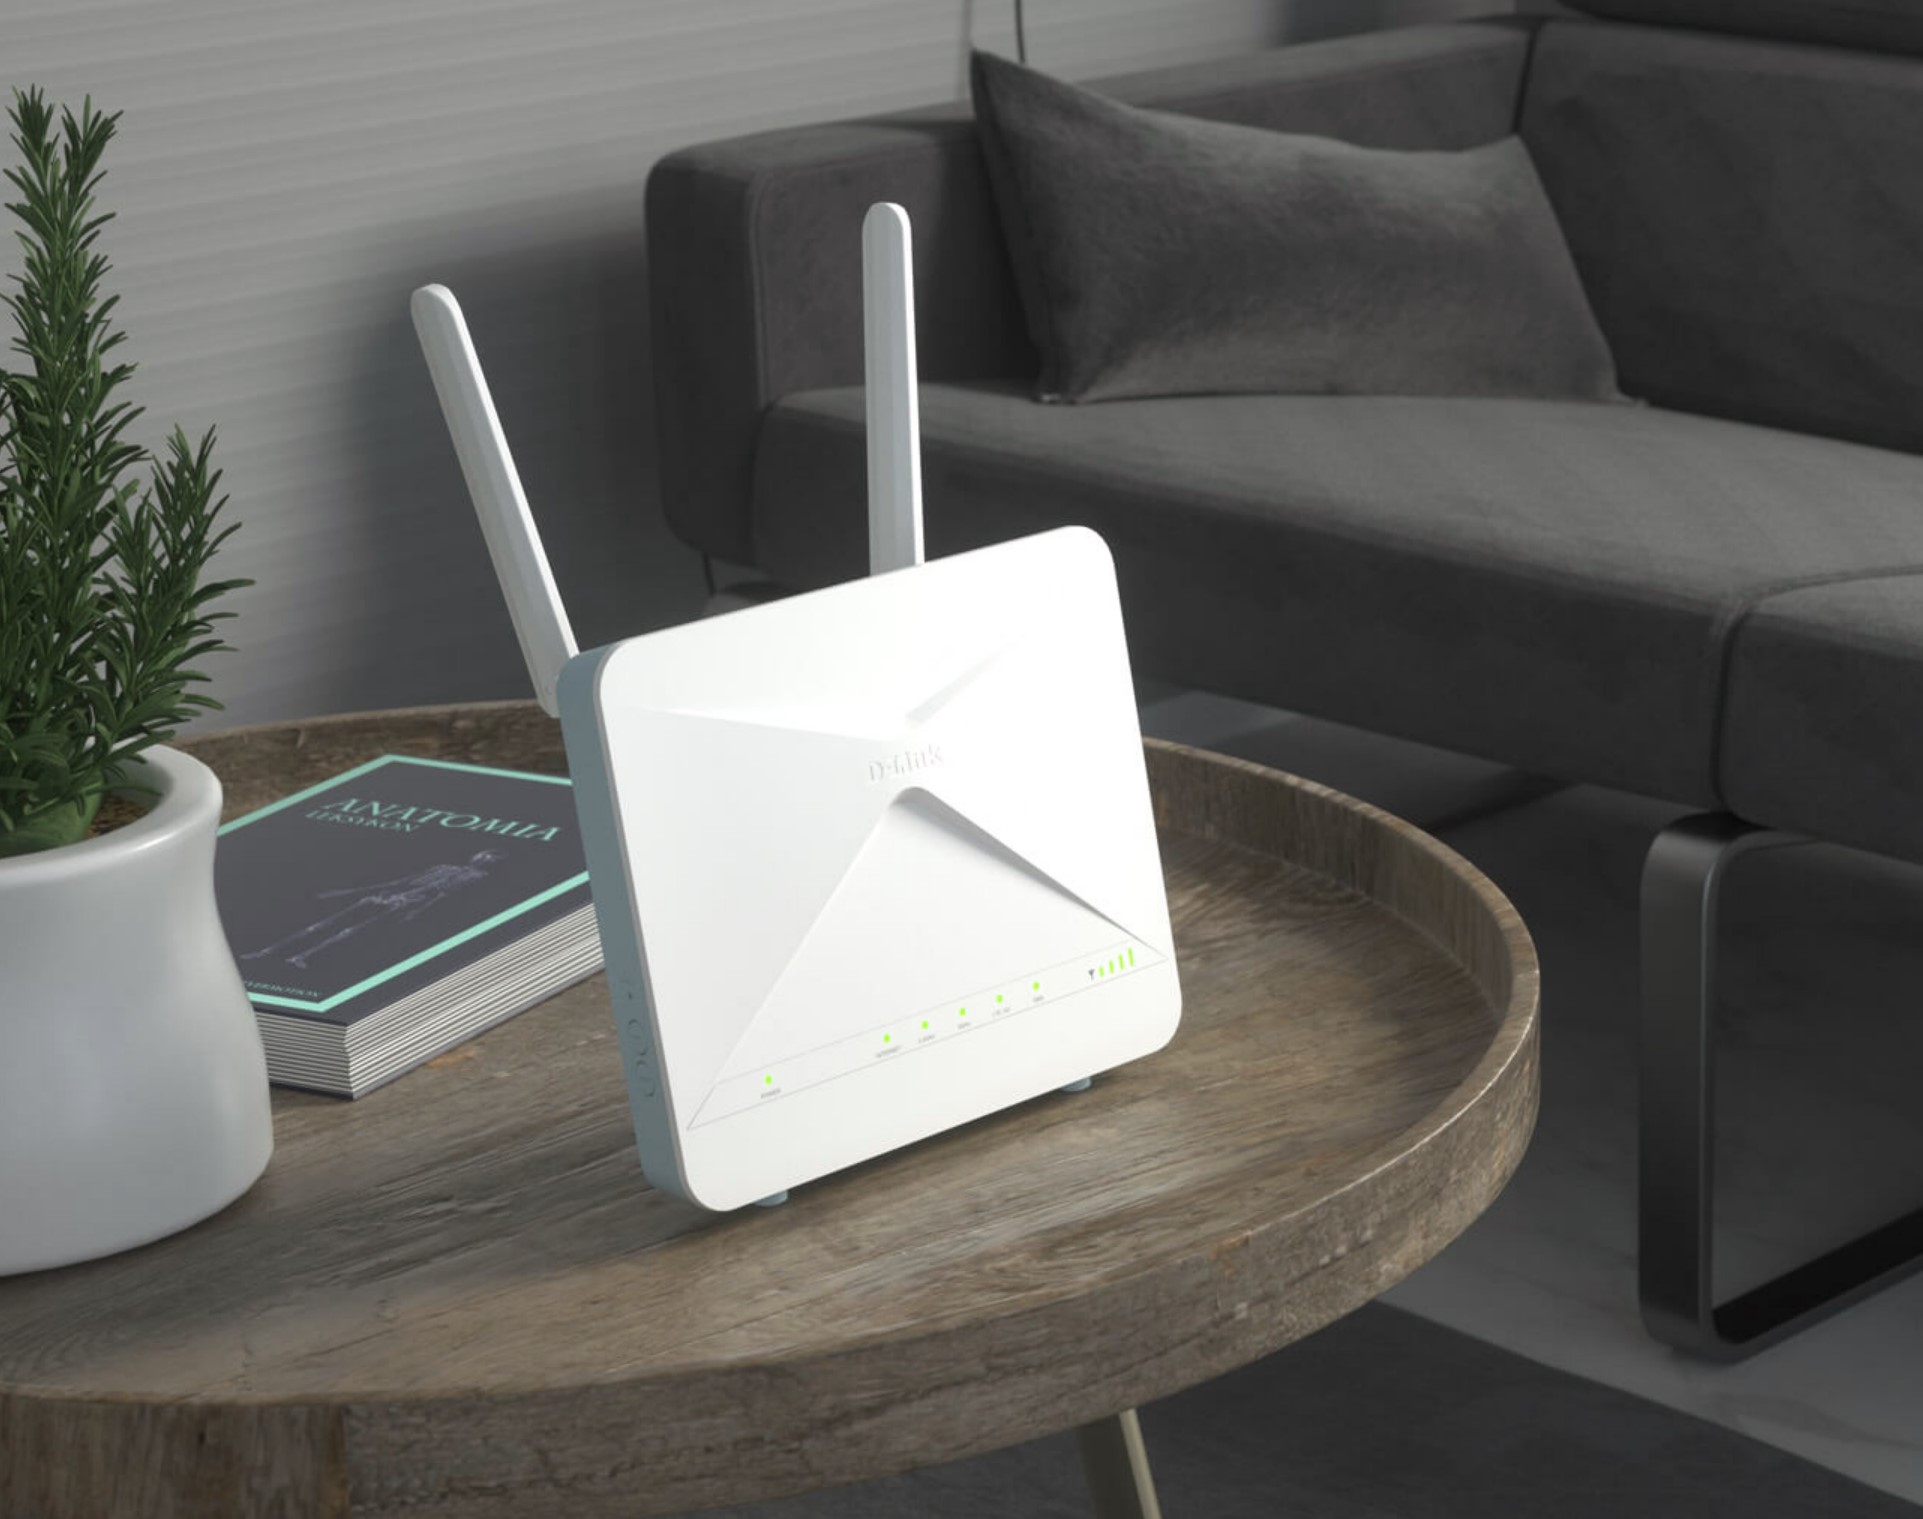 D-Link G415 4G Eagle Pro AI AX1500 mesh capable router (DLink review)